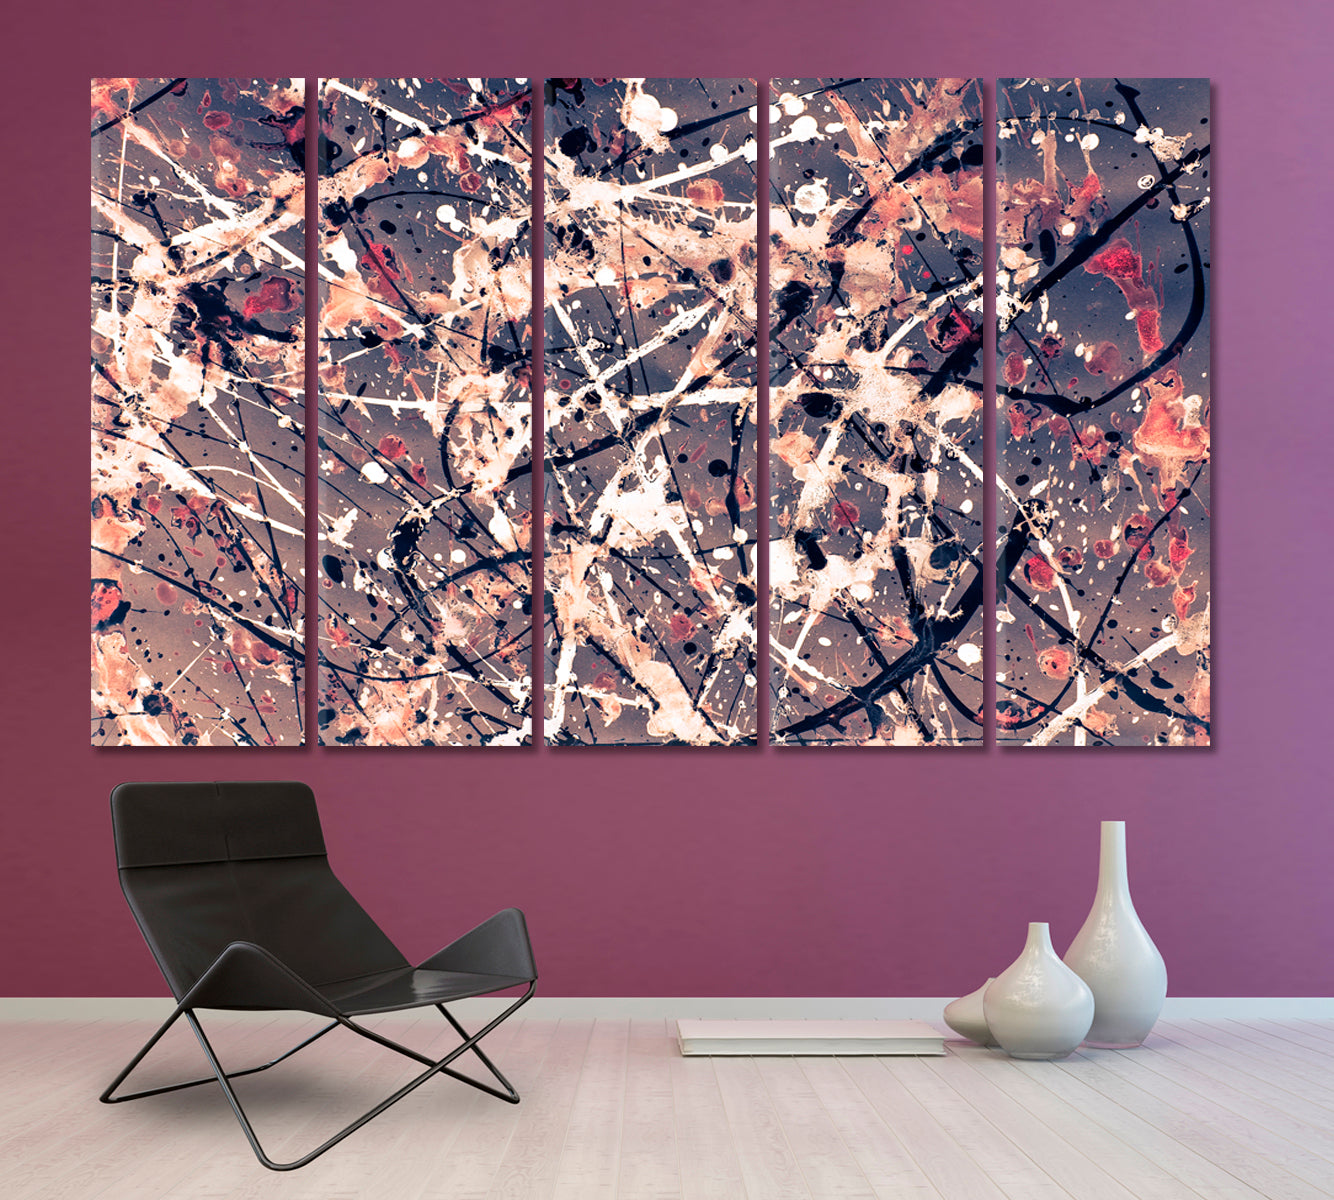 Style of Jackson Pollock Drip Art Abstract Expressionism Pattern Abstract Art Print Artesty 5 panels 36" x 24" 